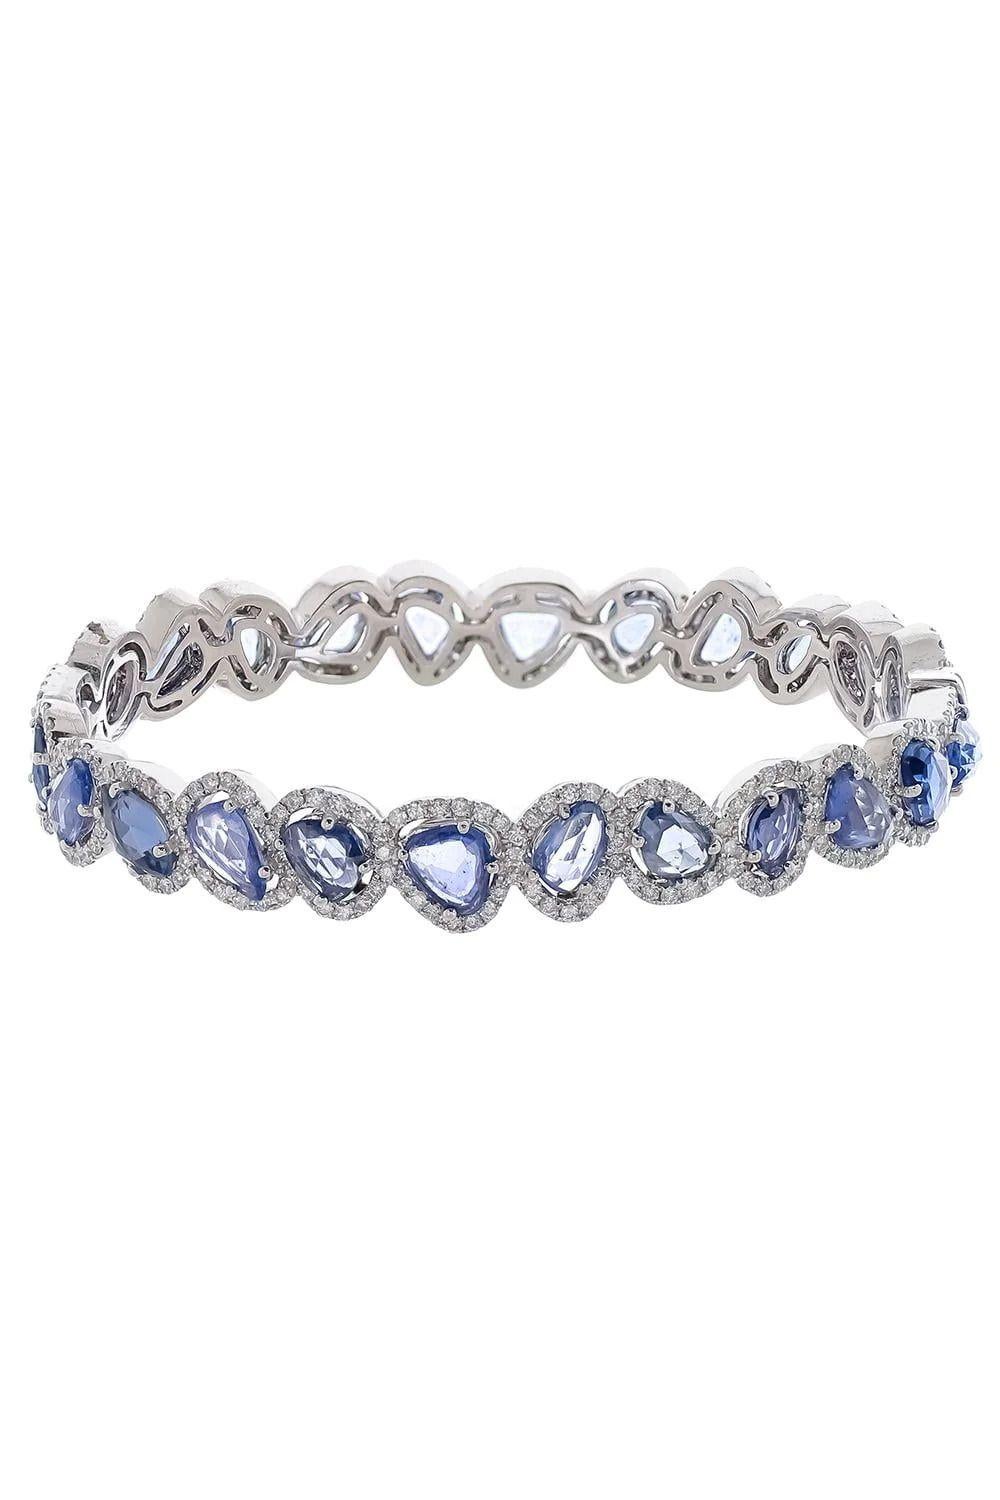 18 kt white gold diamond bangle adorned with 13.03 cts tw of rose cut sapphires laid in varying angles surrounded by 3.00 cts tw of diamonds going all around